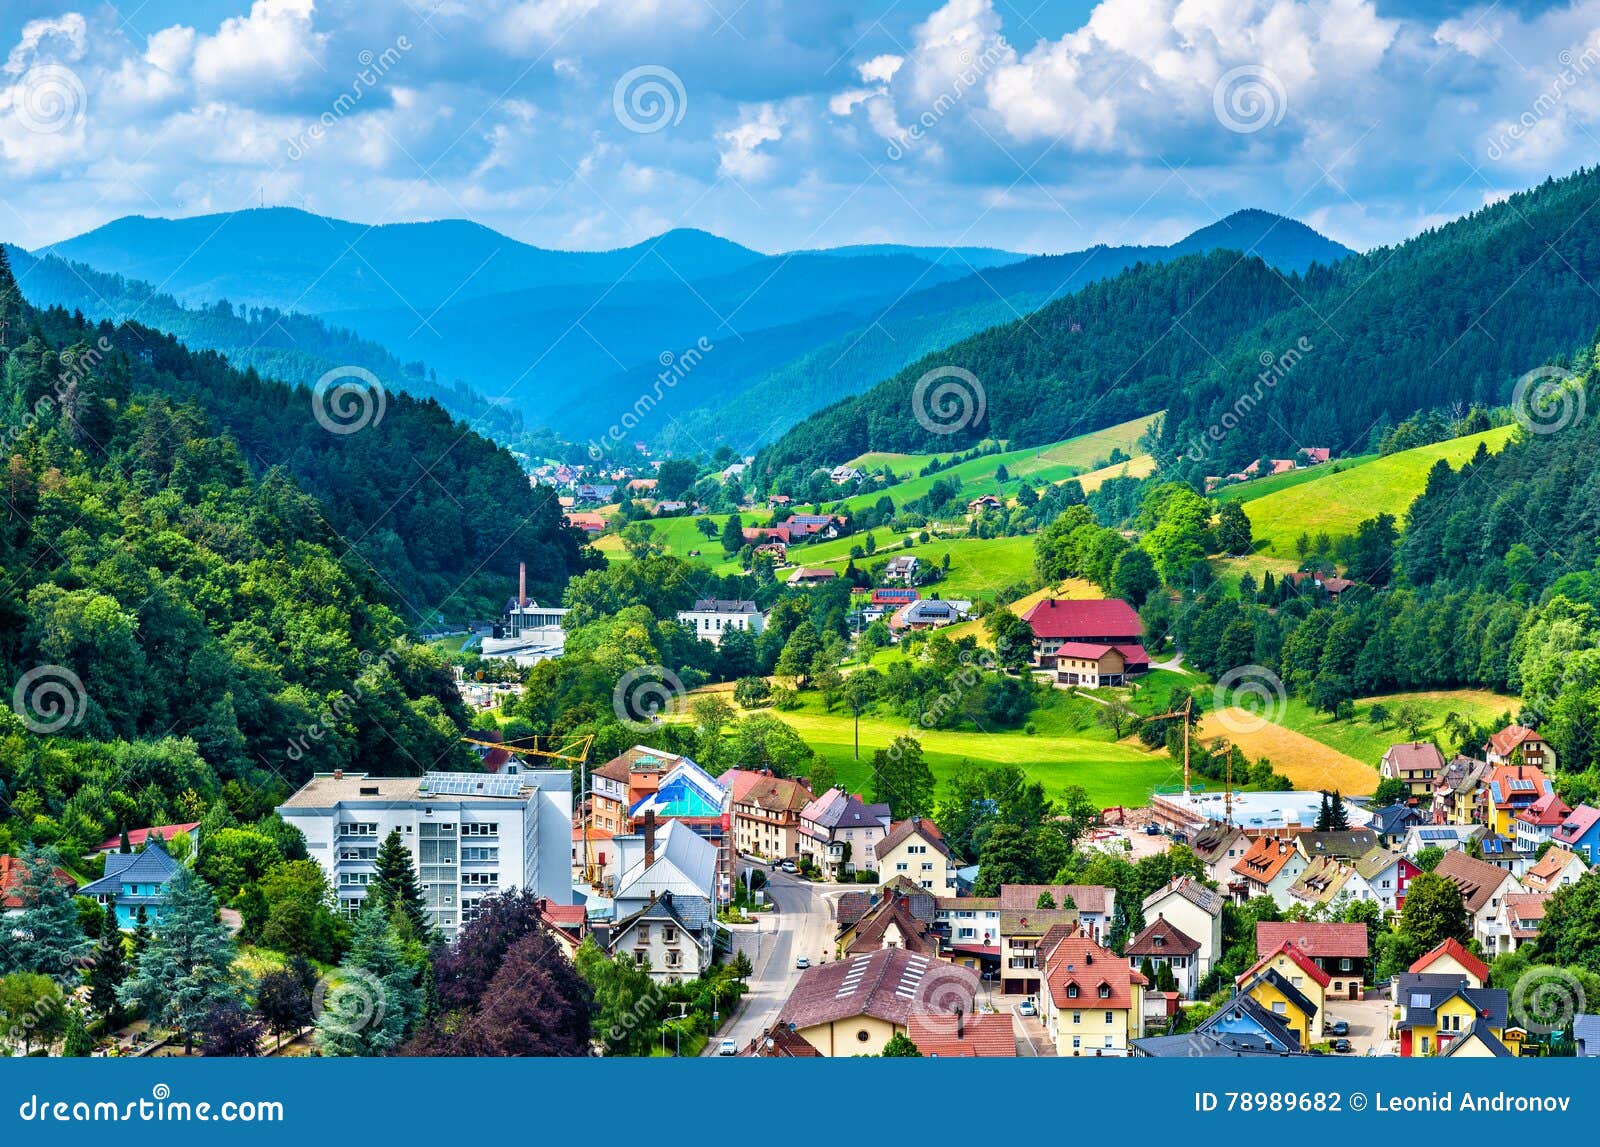 view of hornberg village in schwarzwald mountains - germany